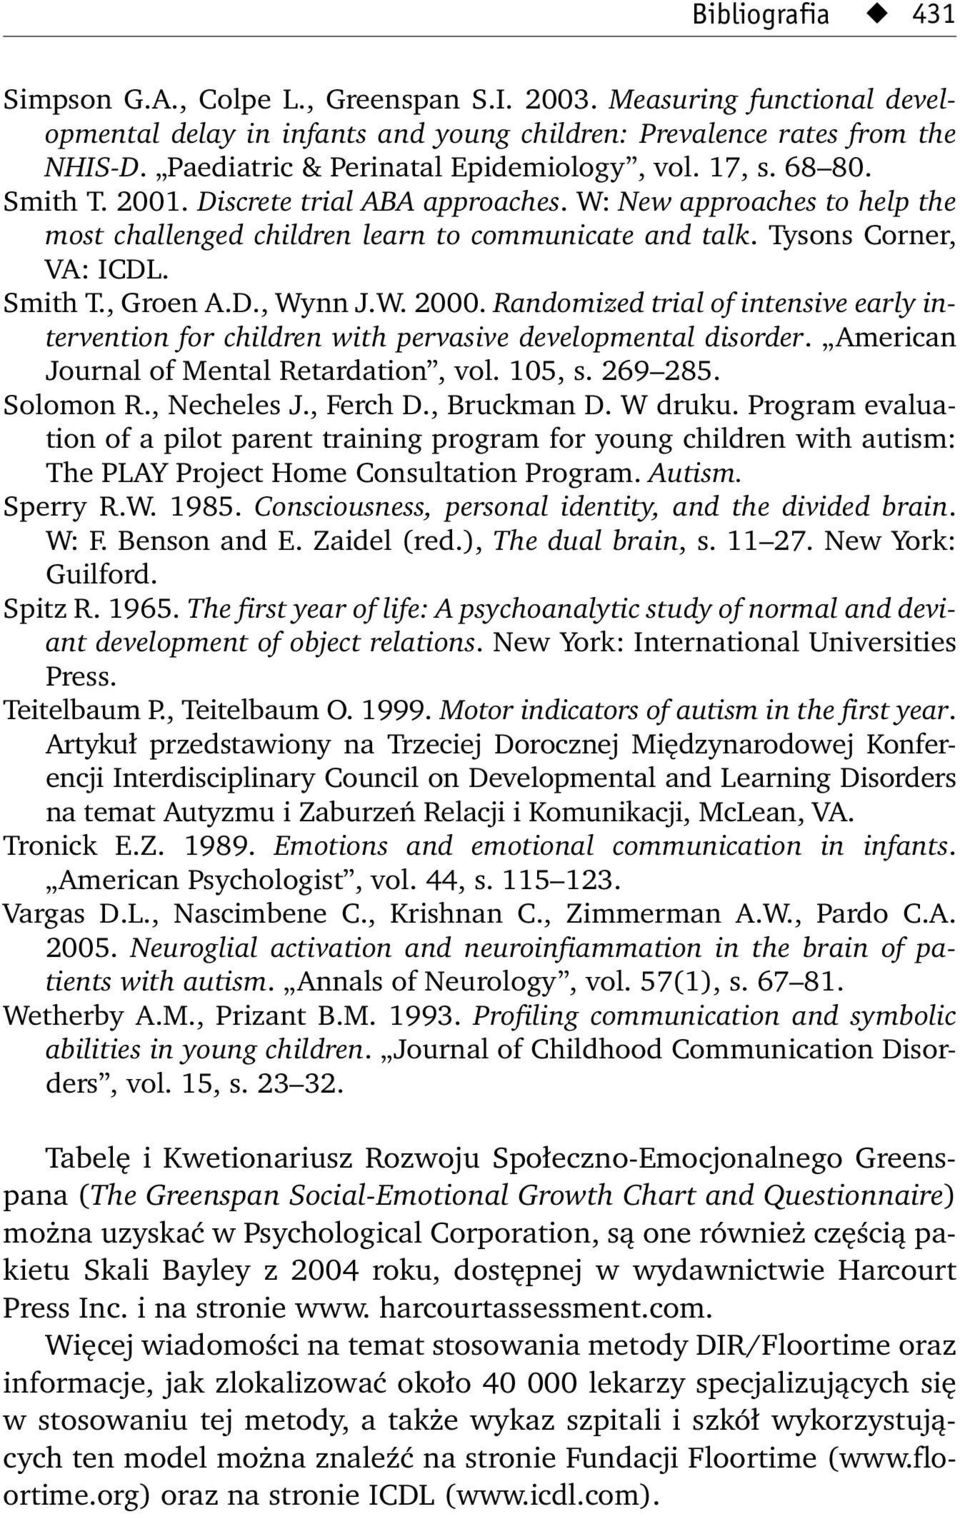 Tysons Corner, VA: ICDL. Smith T., Groen A.D., Wynn J.W. 2000. Randomized trial of intensive early intervention for children with pervasive developmental disorder.